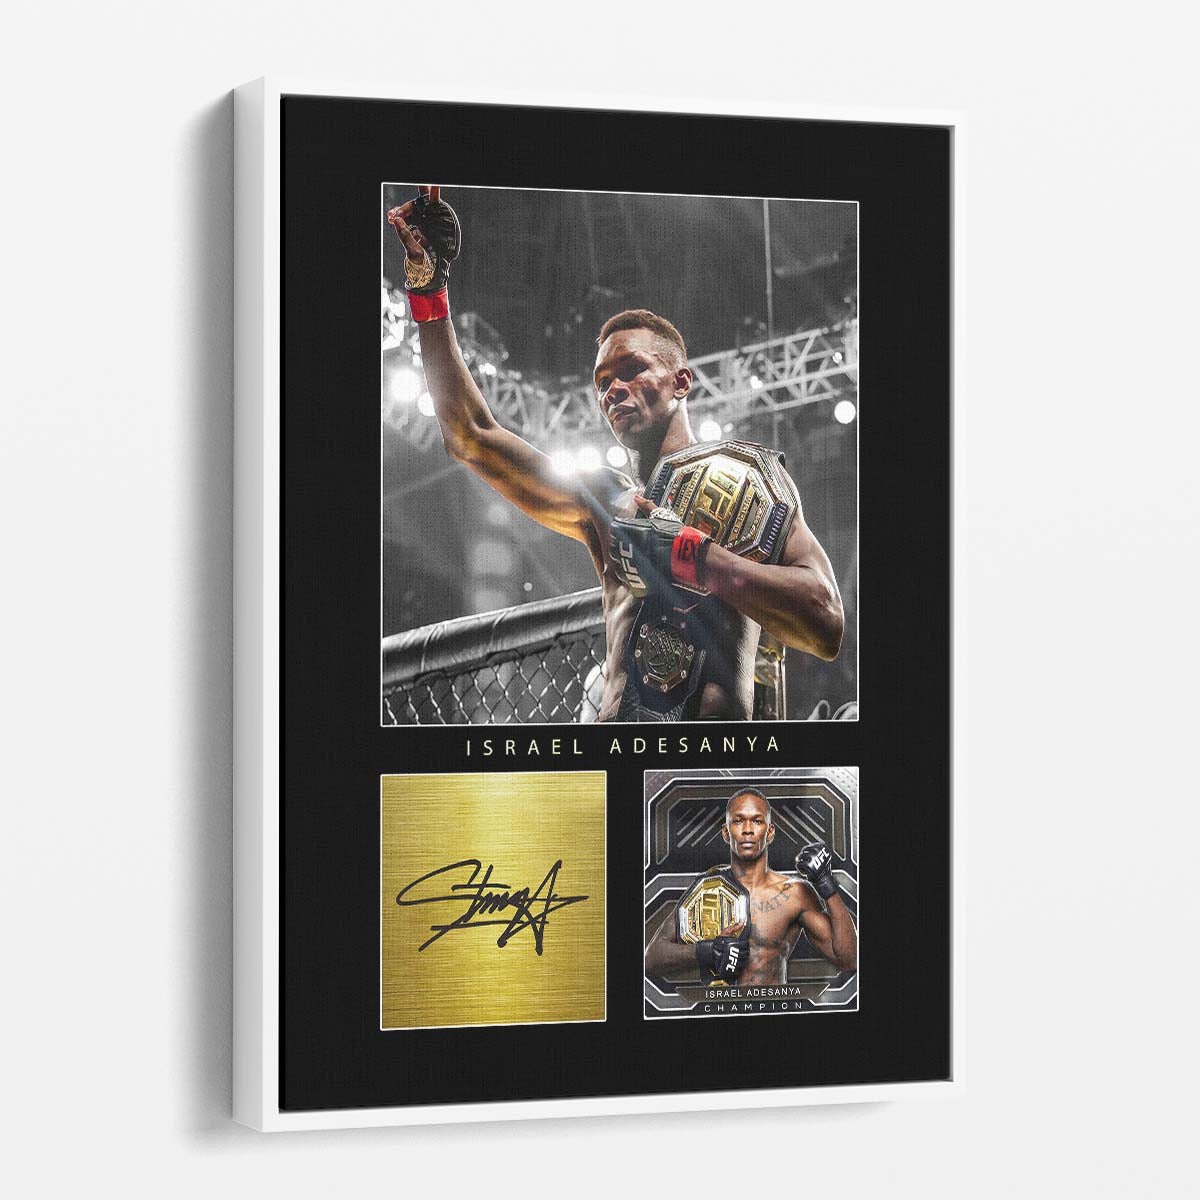 Israel Adesanya Signature MMA Wall Art by Luxuriance Designs. Made in USA.